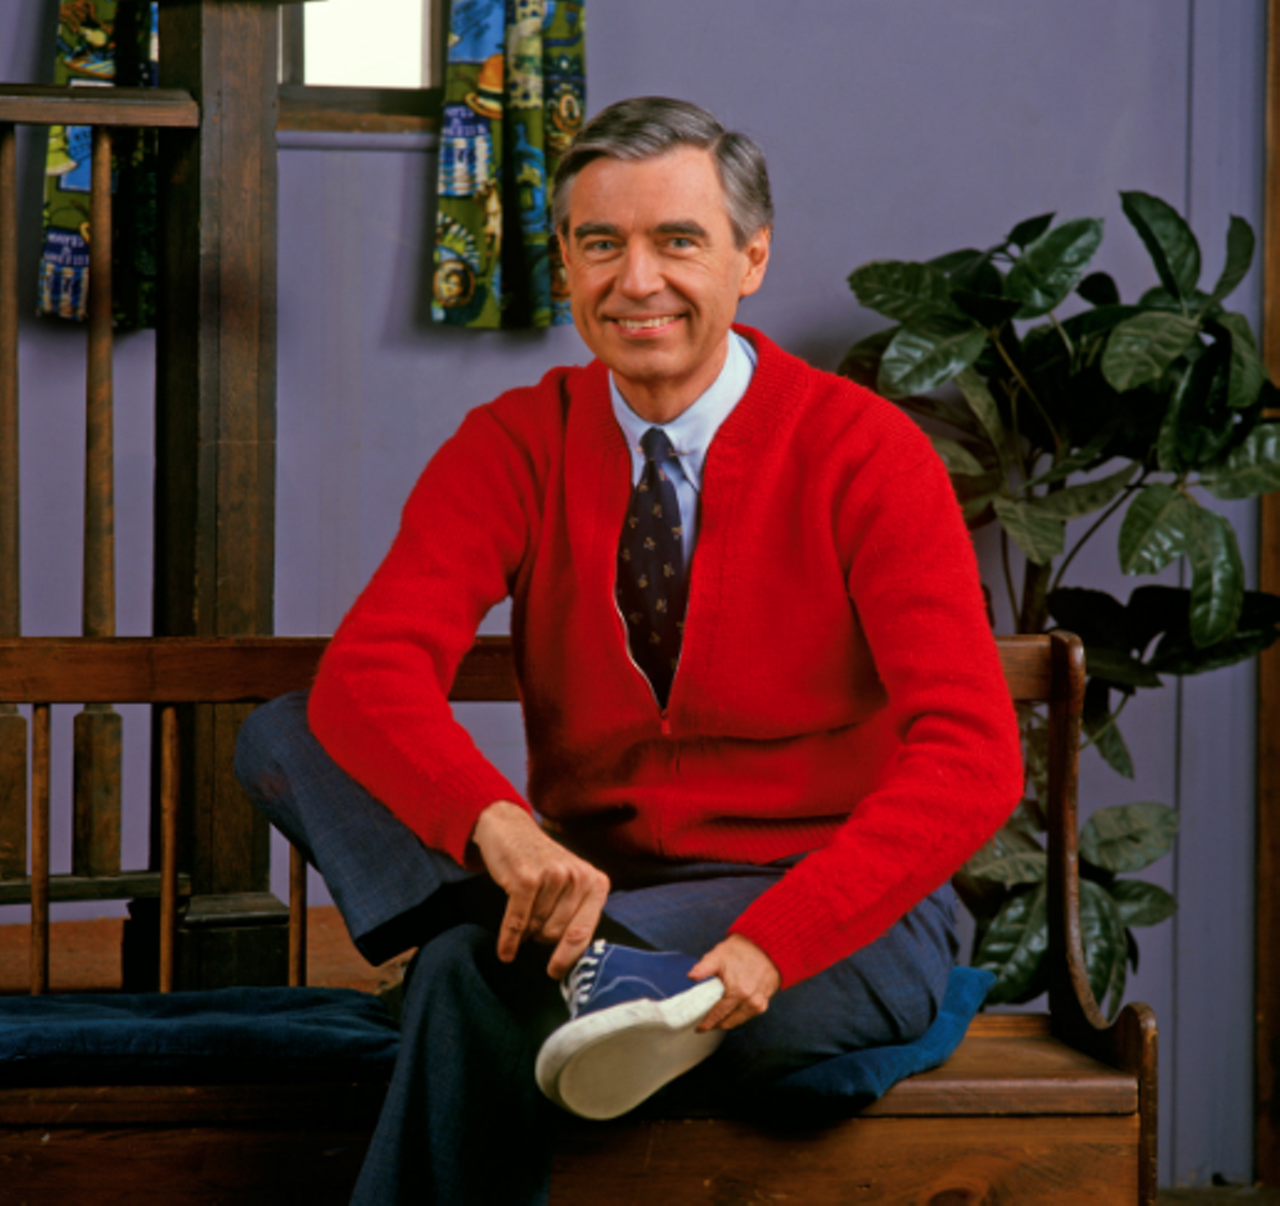 At Rollins College, Fred Rogers wrote &#147;Beautiful Day in the Neighborhood&#148; as his senior thesis. The Mister Rogers&#146; Neighborhood star graduated from the college in 1951 with a degree in music composition.
Photo via PBS